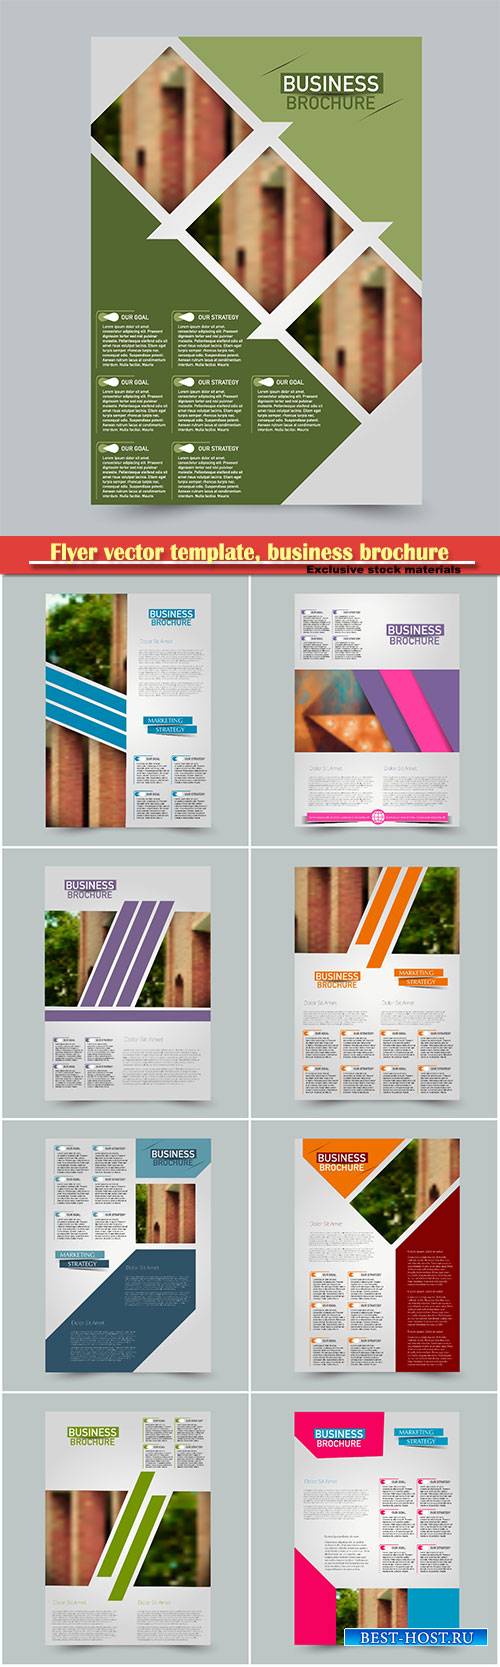 Flyer vector template, business brochure, magazine cover # 5